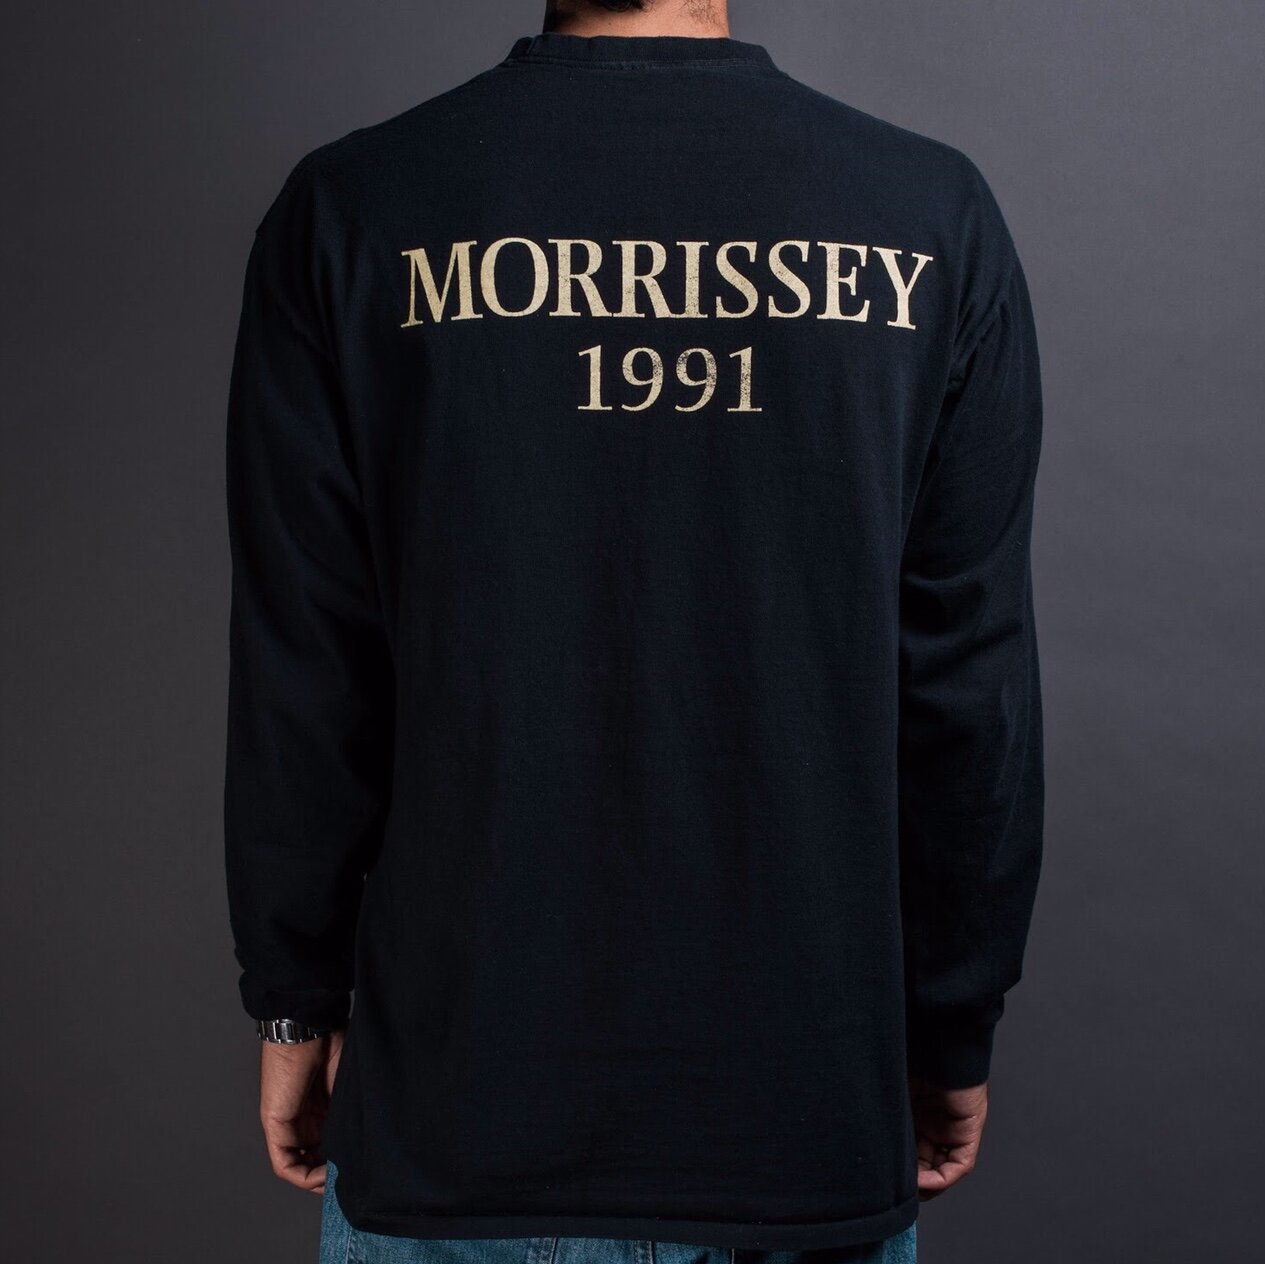 Vintage 1992 Morrissey Have You Ever Seen a Biscuit-Tin by Moonlight Longsleeve